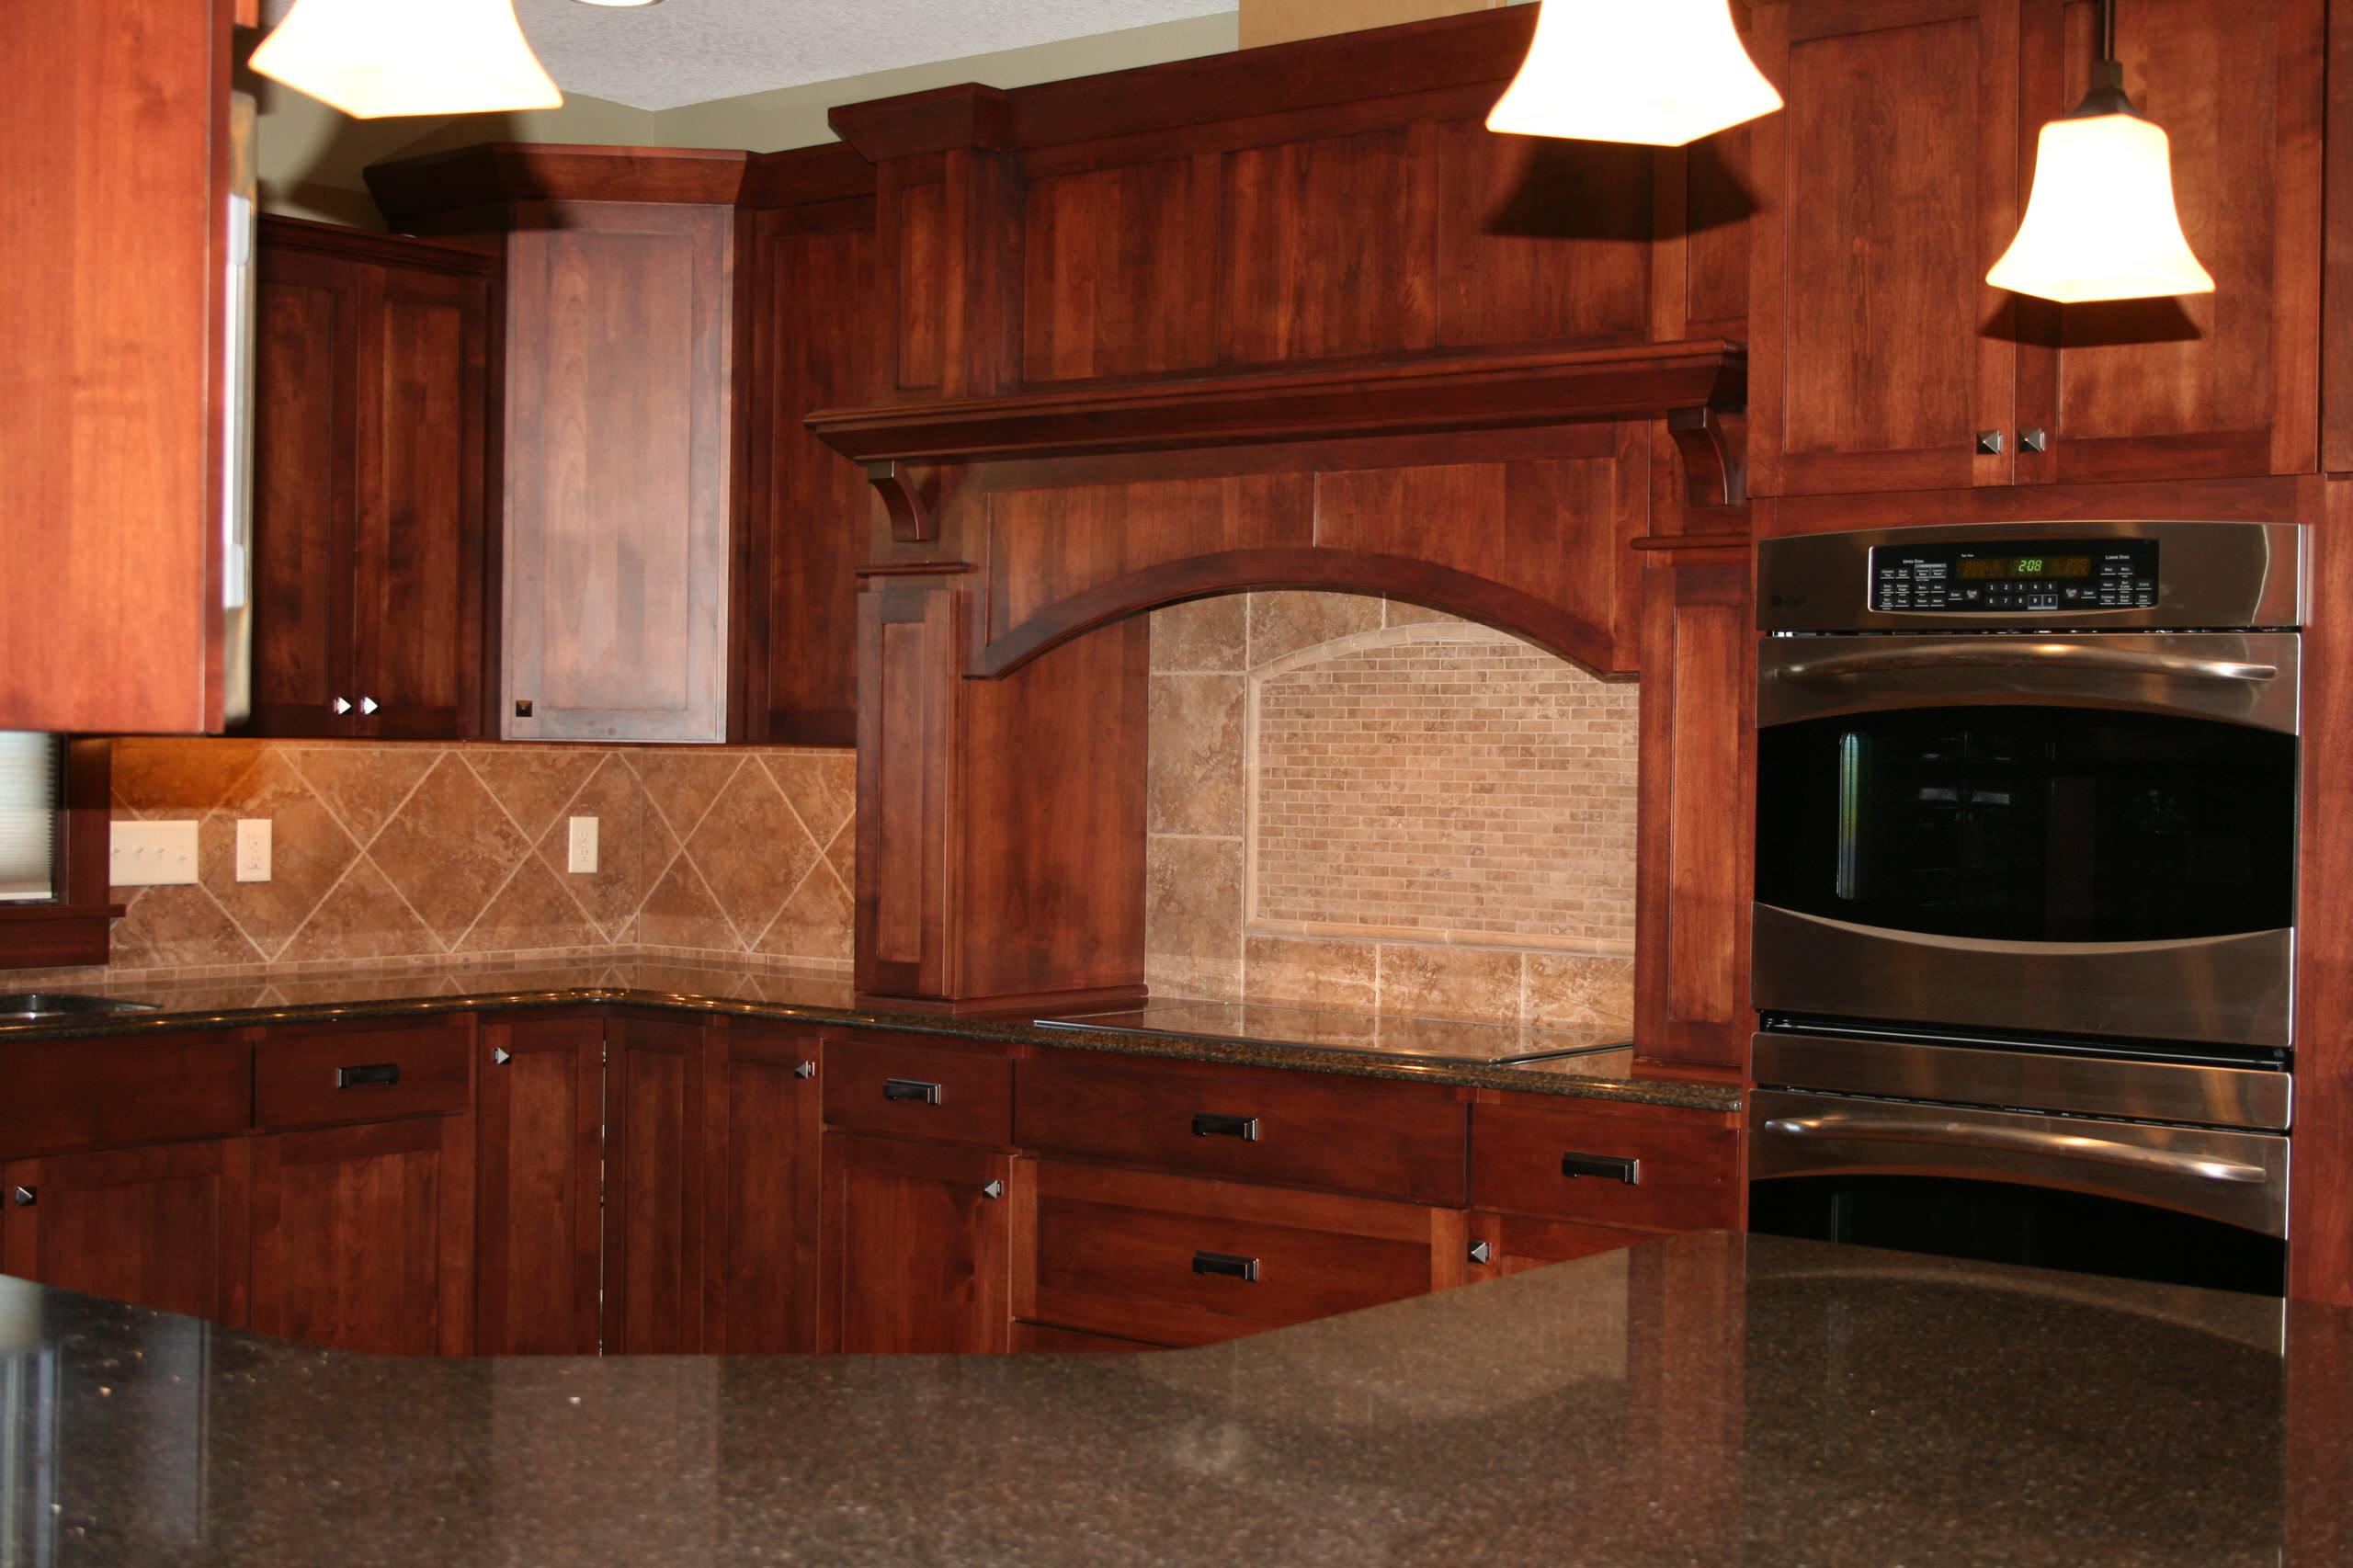 massive cherry craftsman style cabinets with storage galore.  Built in double ovens and cooktop set in durable quarts counter tops for easy cleaning and great look.